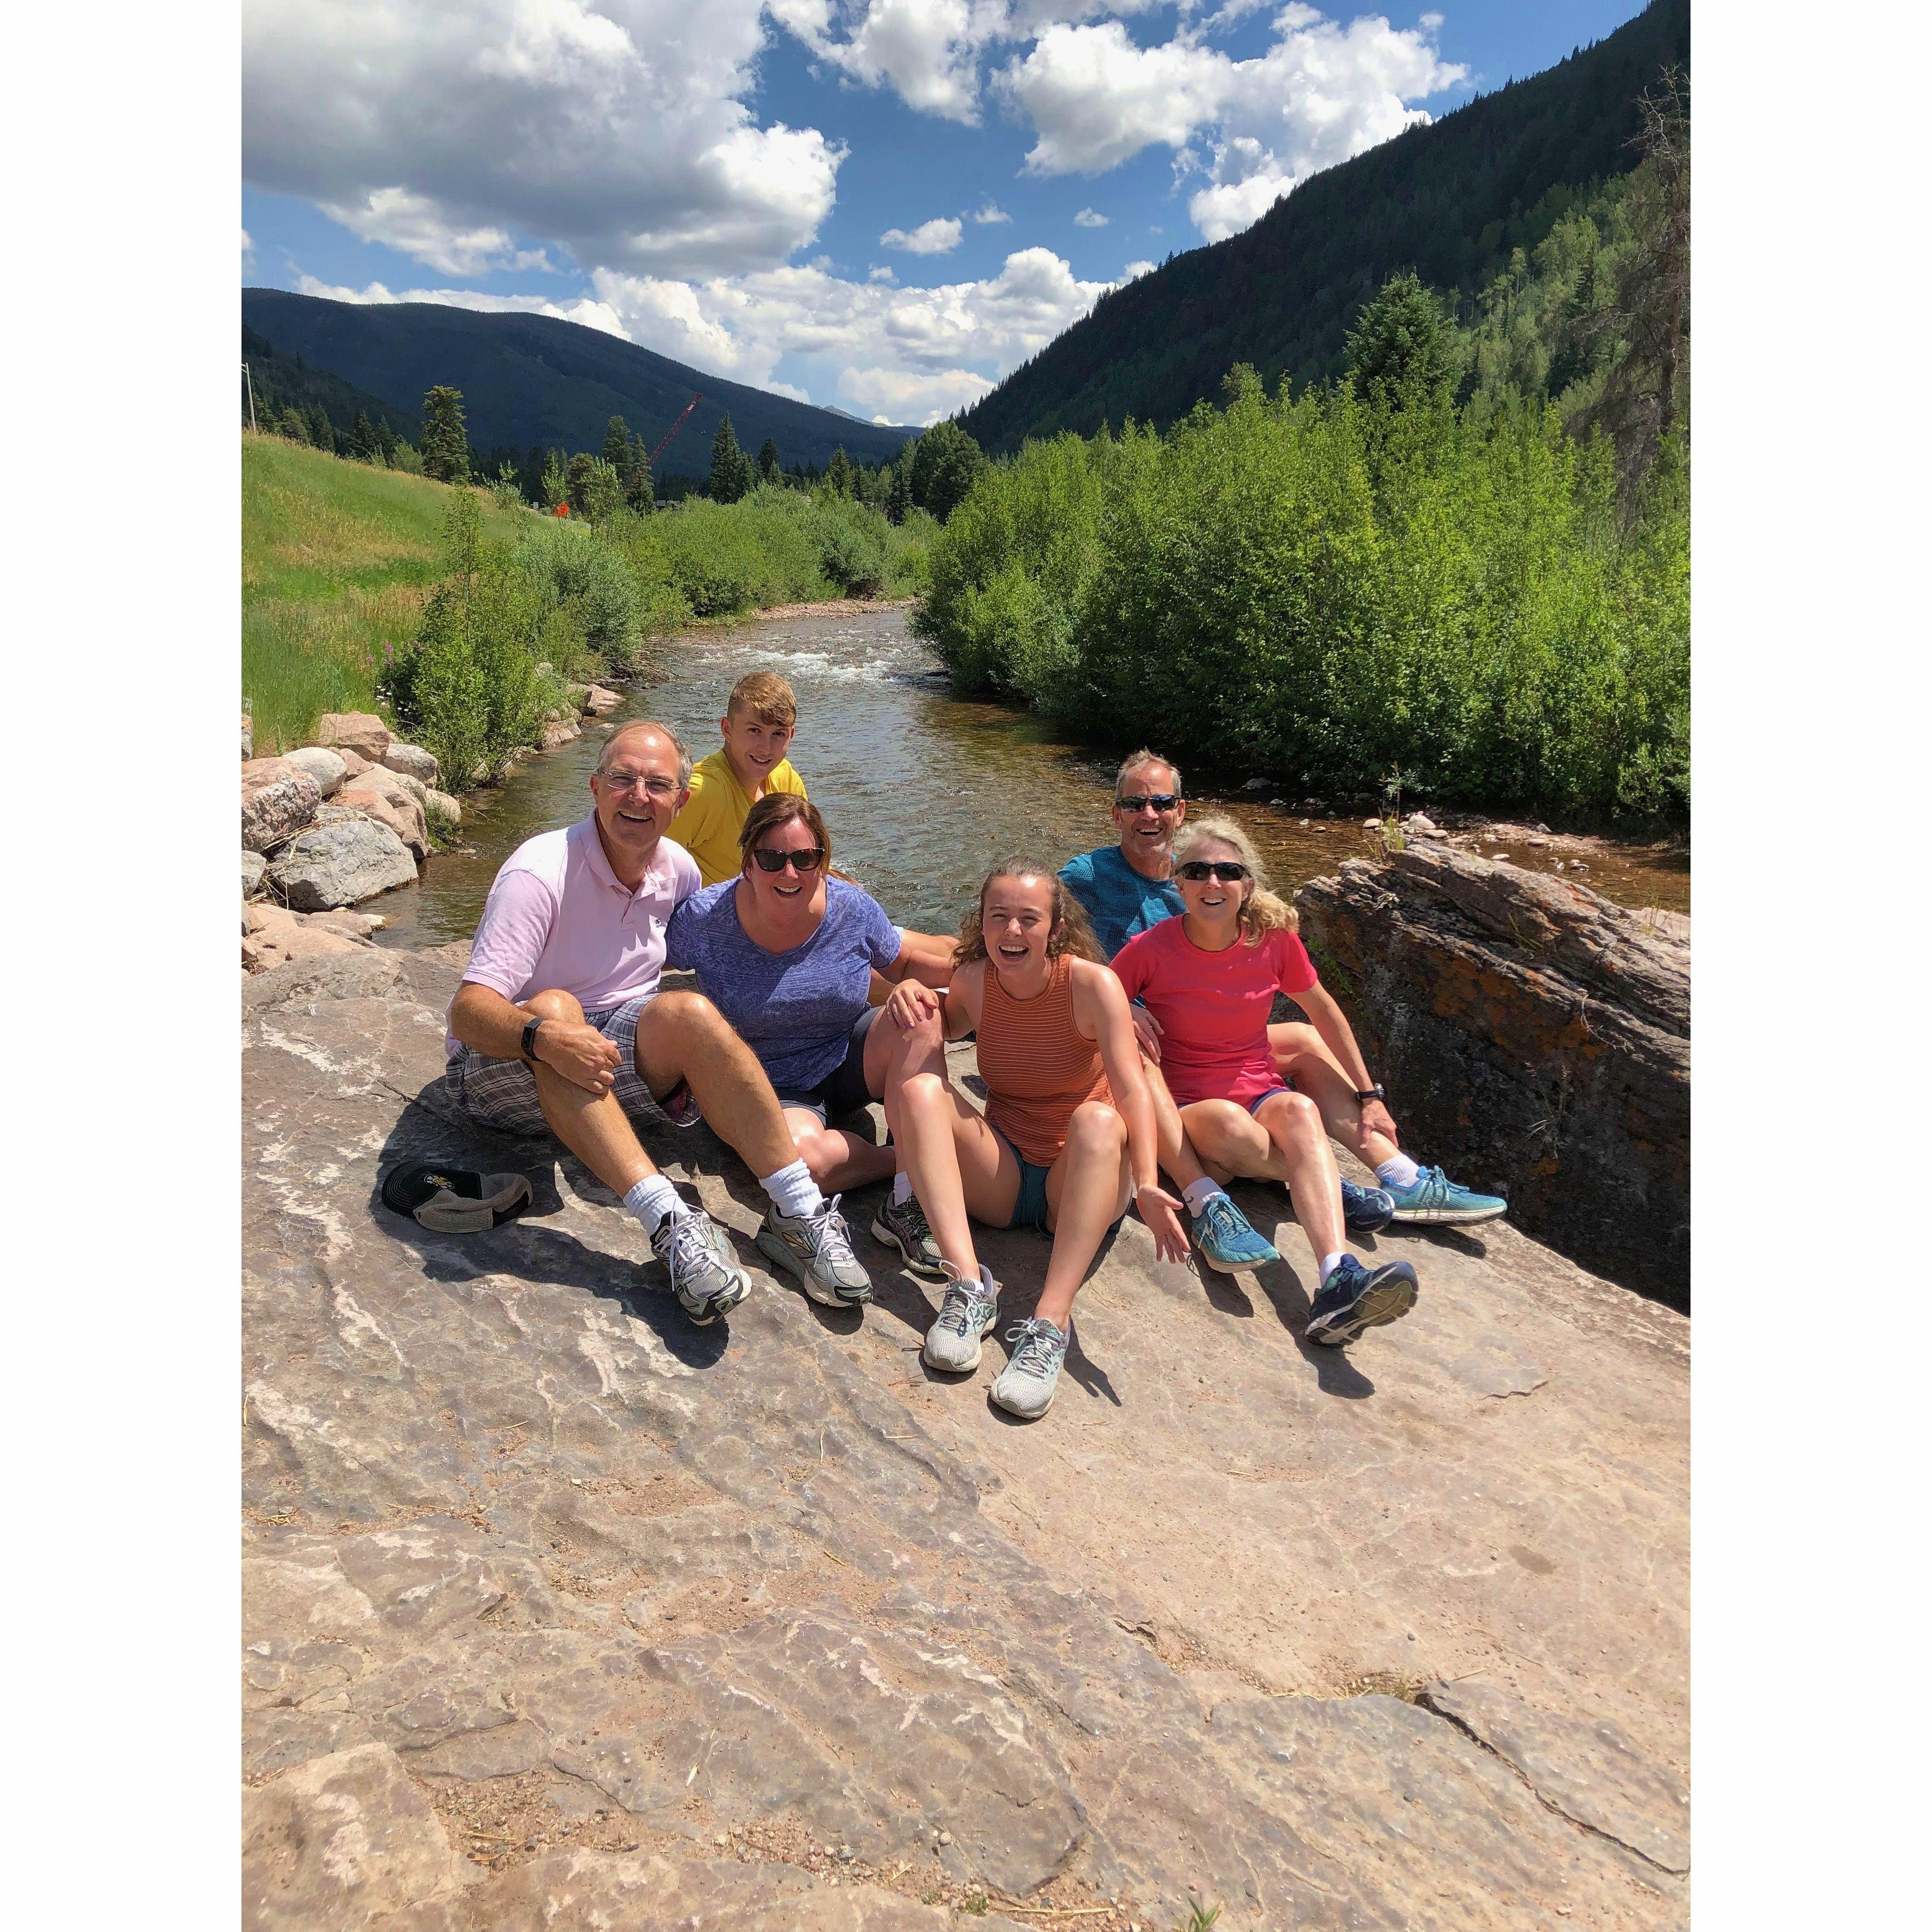 Dave's family doing a bike ride in Vail together